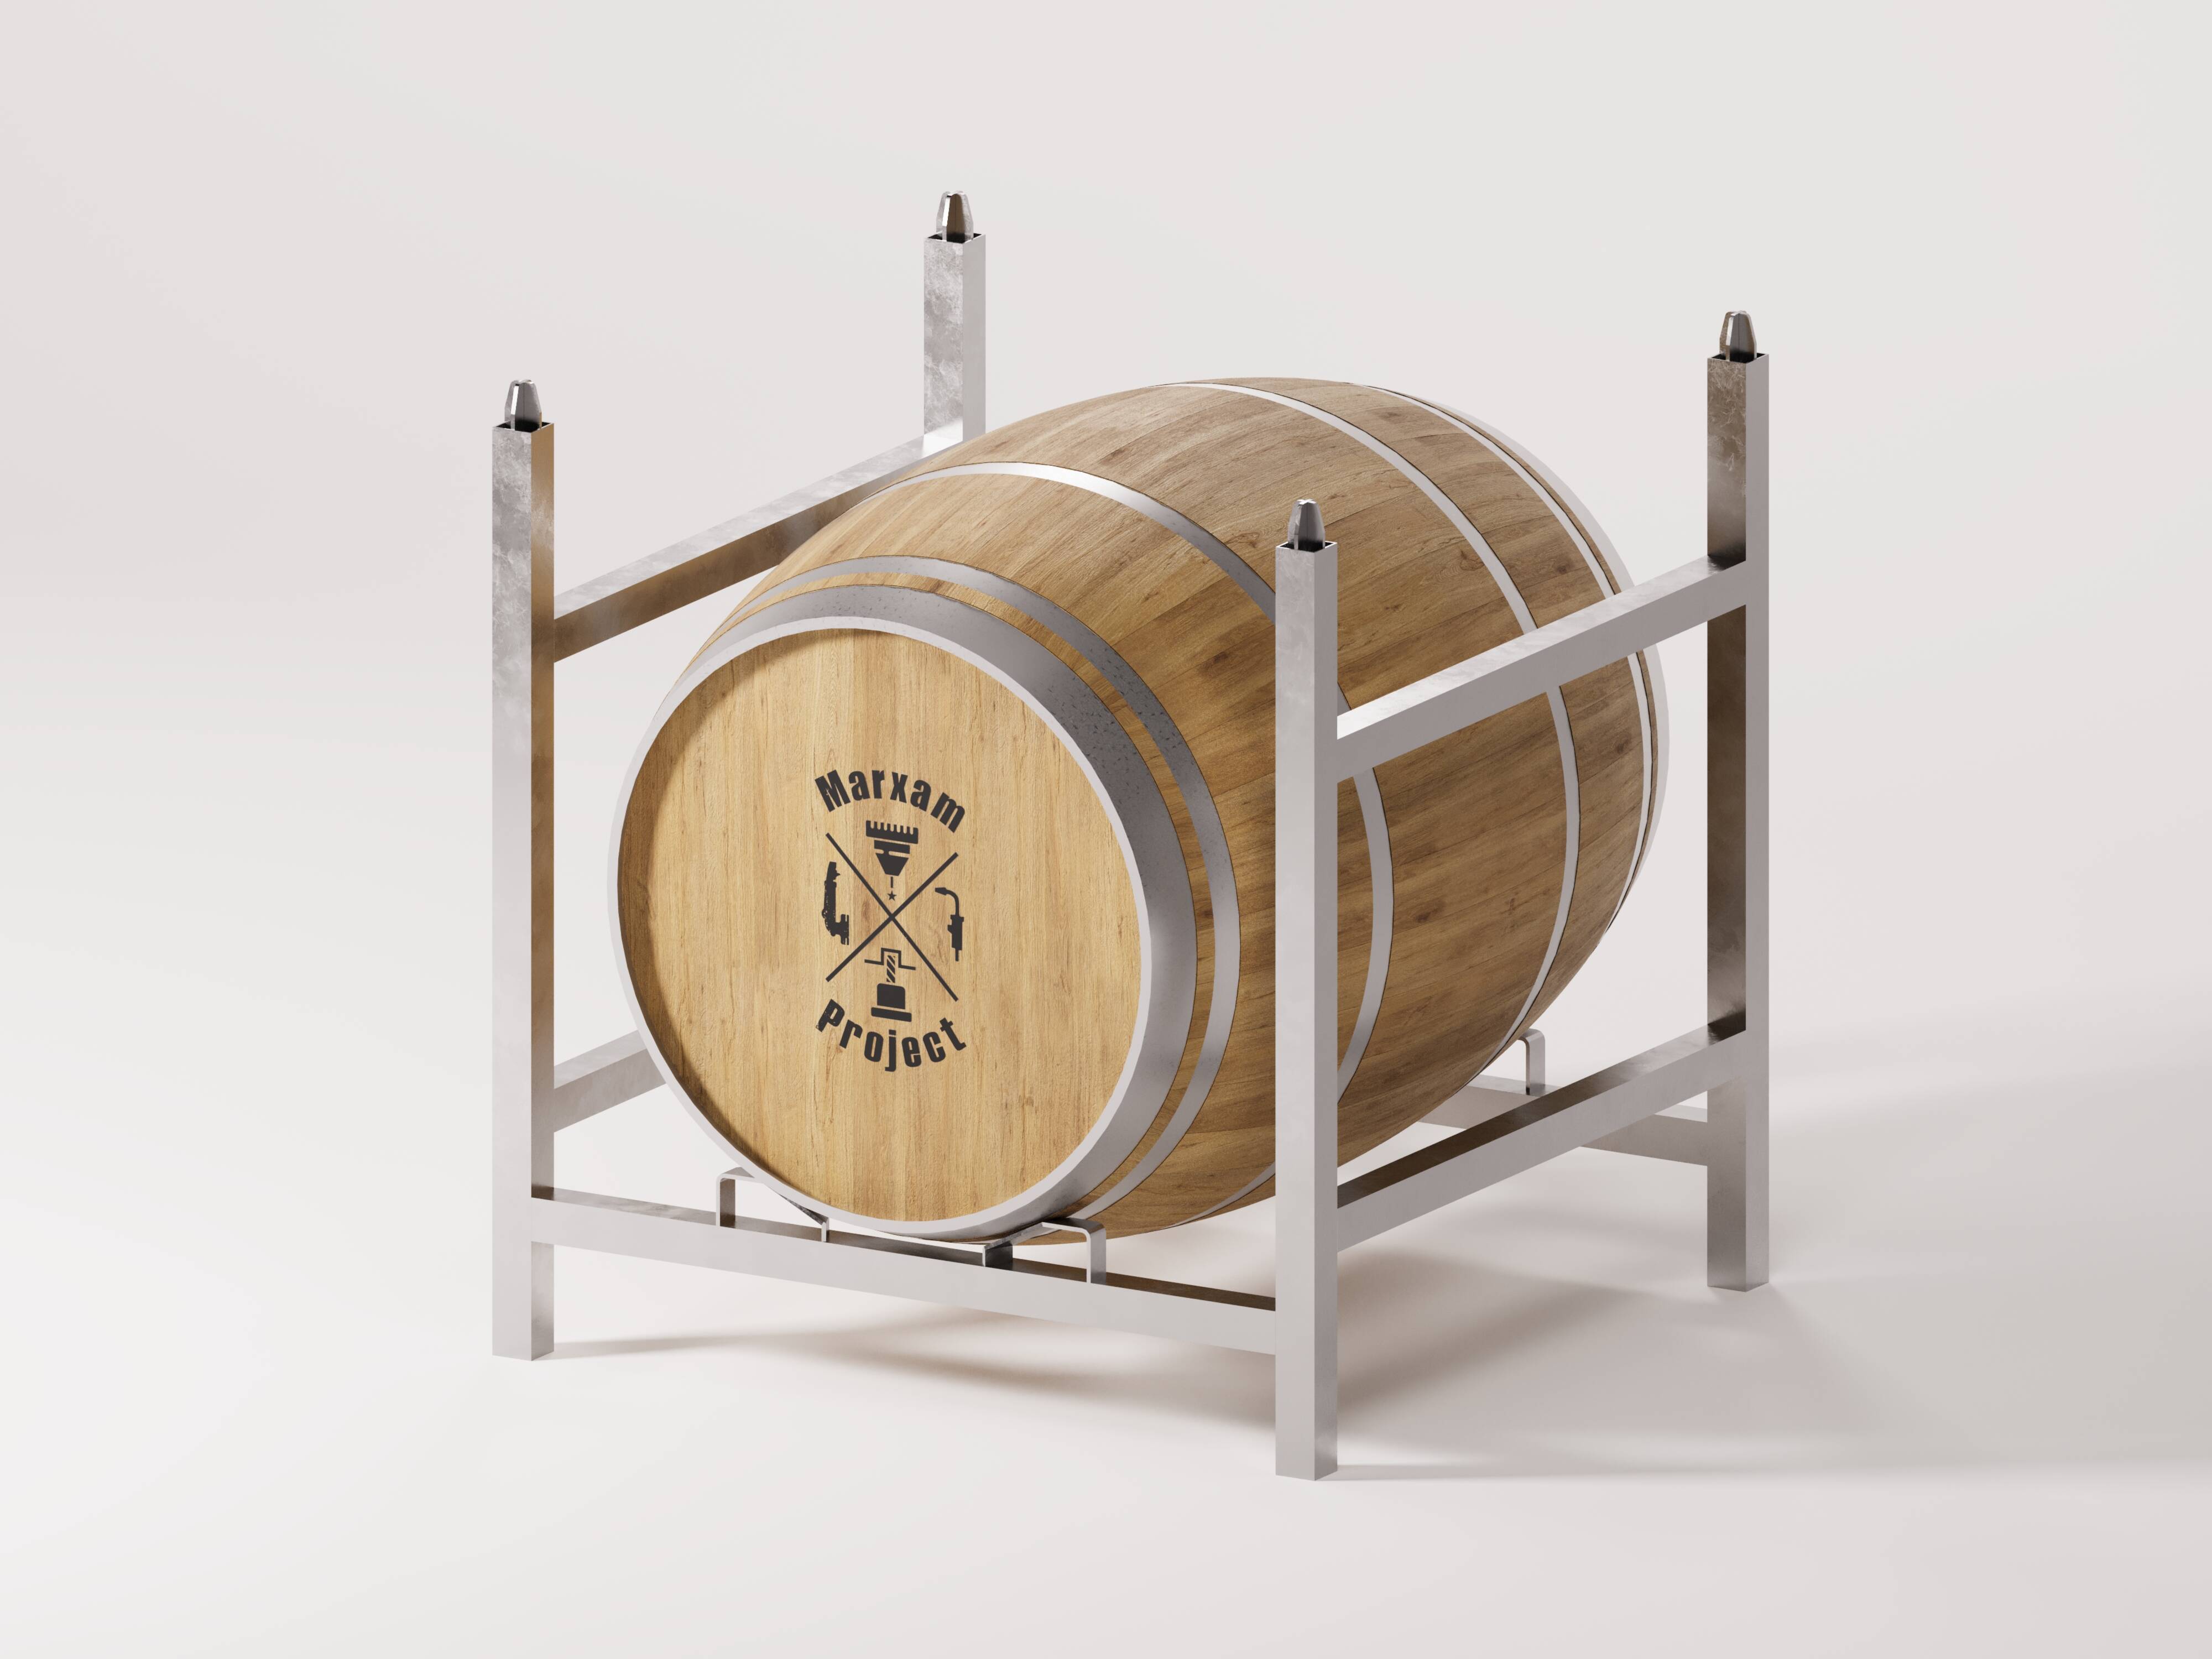 A photograph displays a wooden barrel placed atop a robust metal barrel cage. The barrel is enclosed within a protective cage, emphasizing its secure positioning and excellent condition.